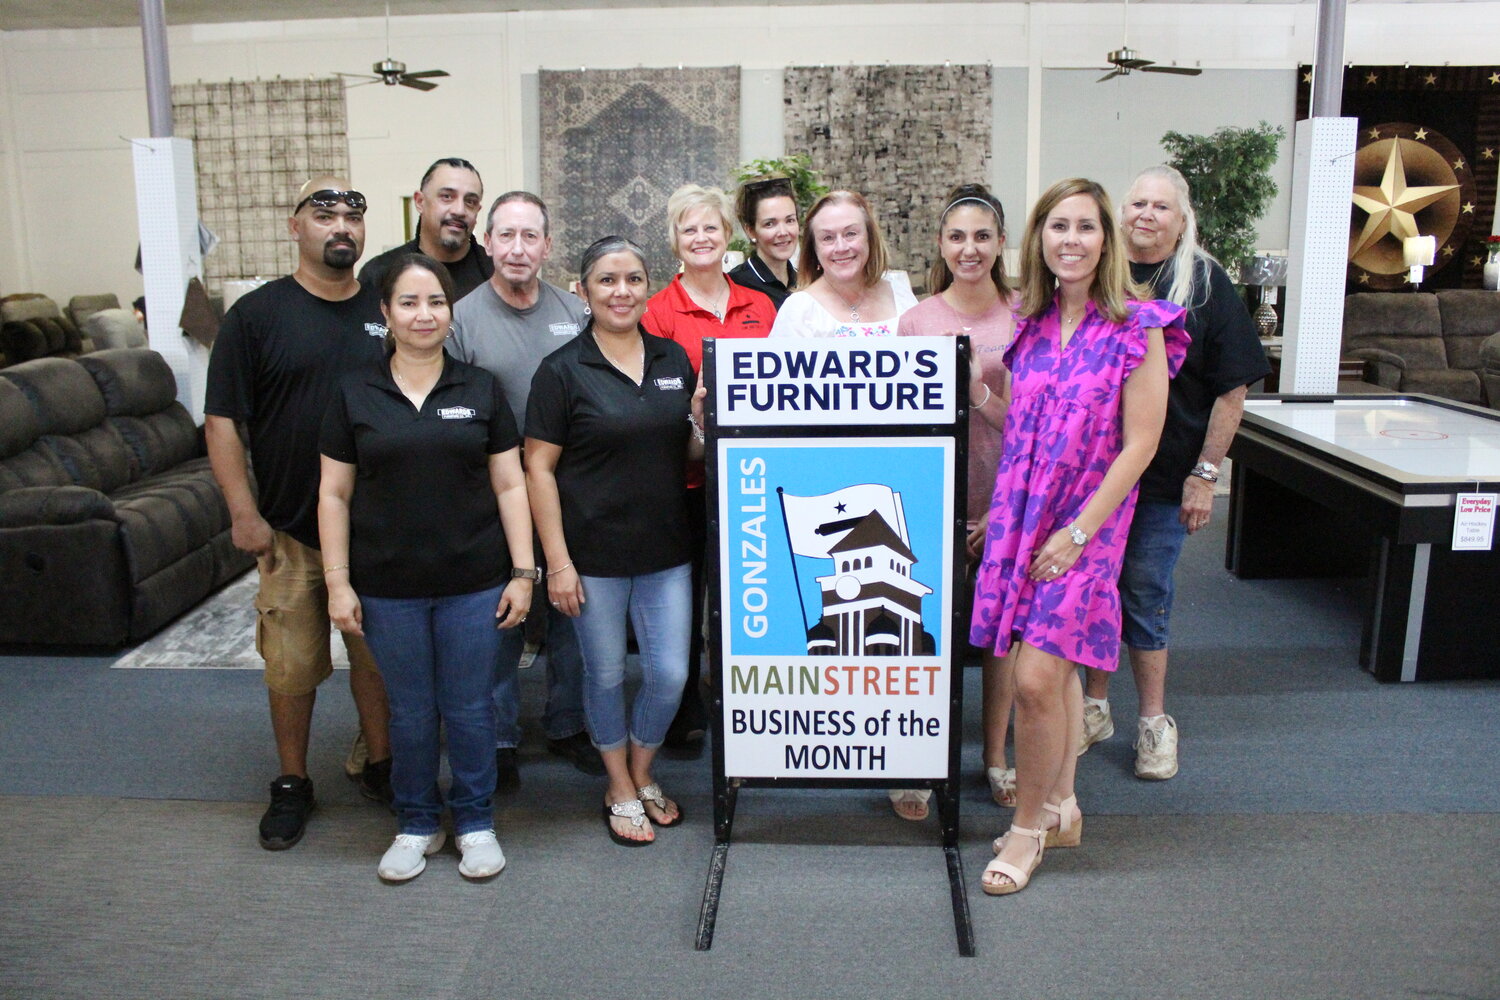 Gonzales Main Street board names Edward Furniture as the Main Street Business of the Month.